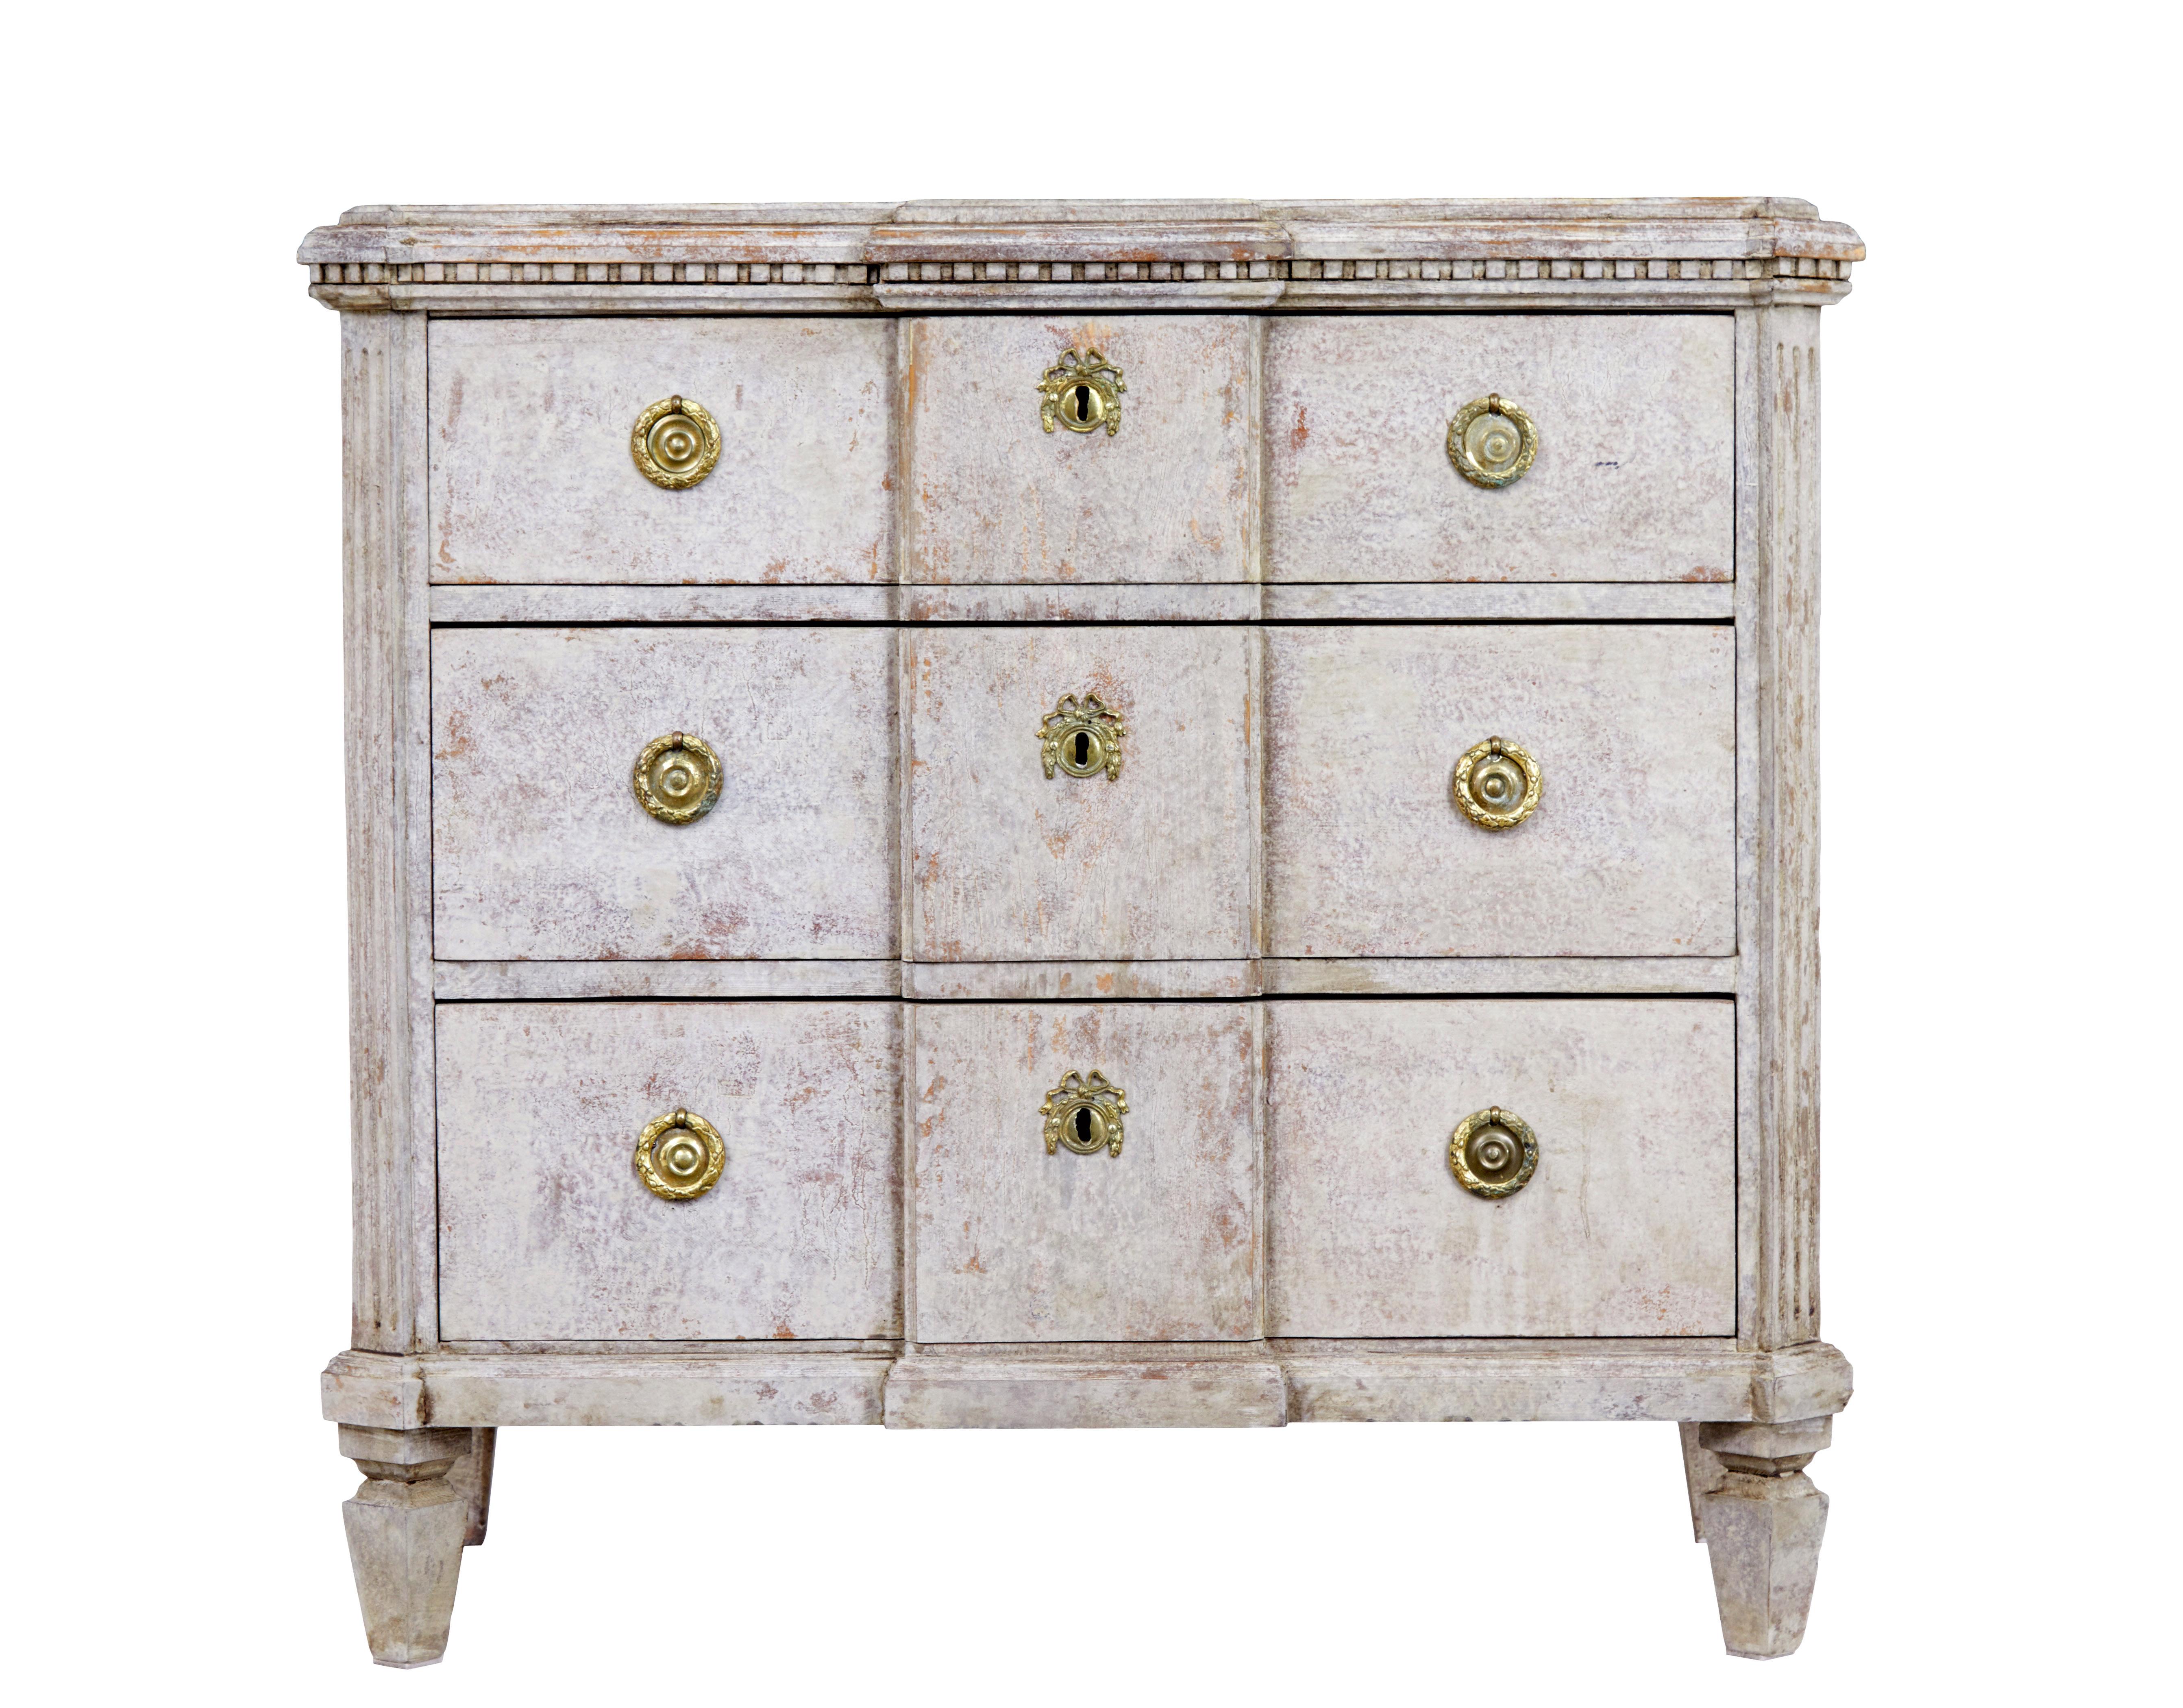 19th Century Swedish 19th century painted breakfront chest of drawers For Sale